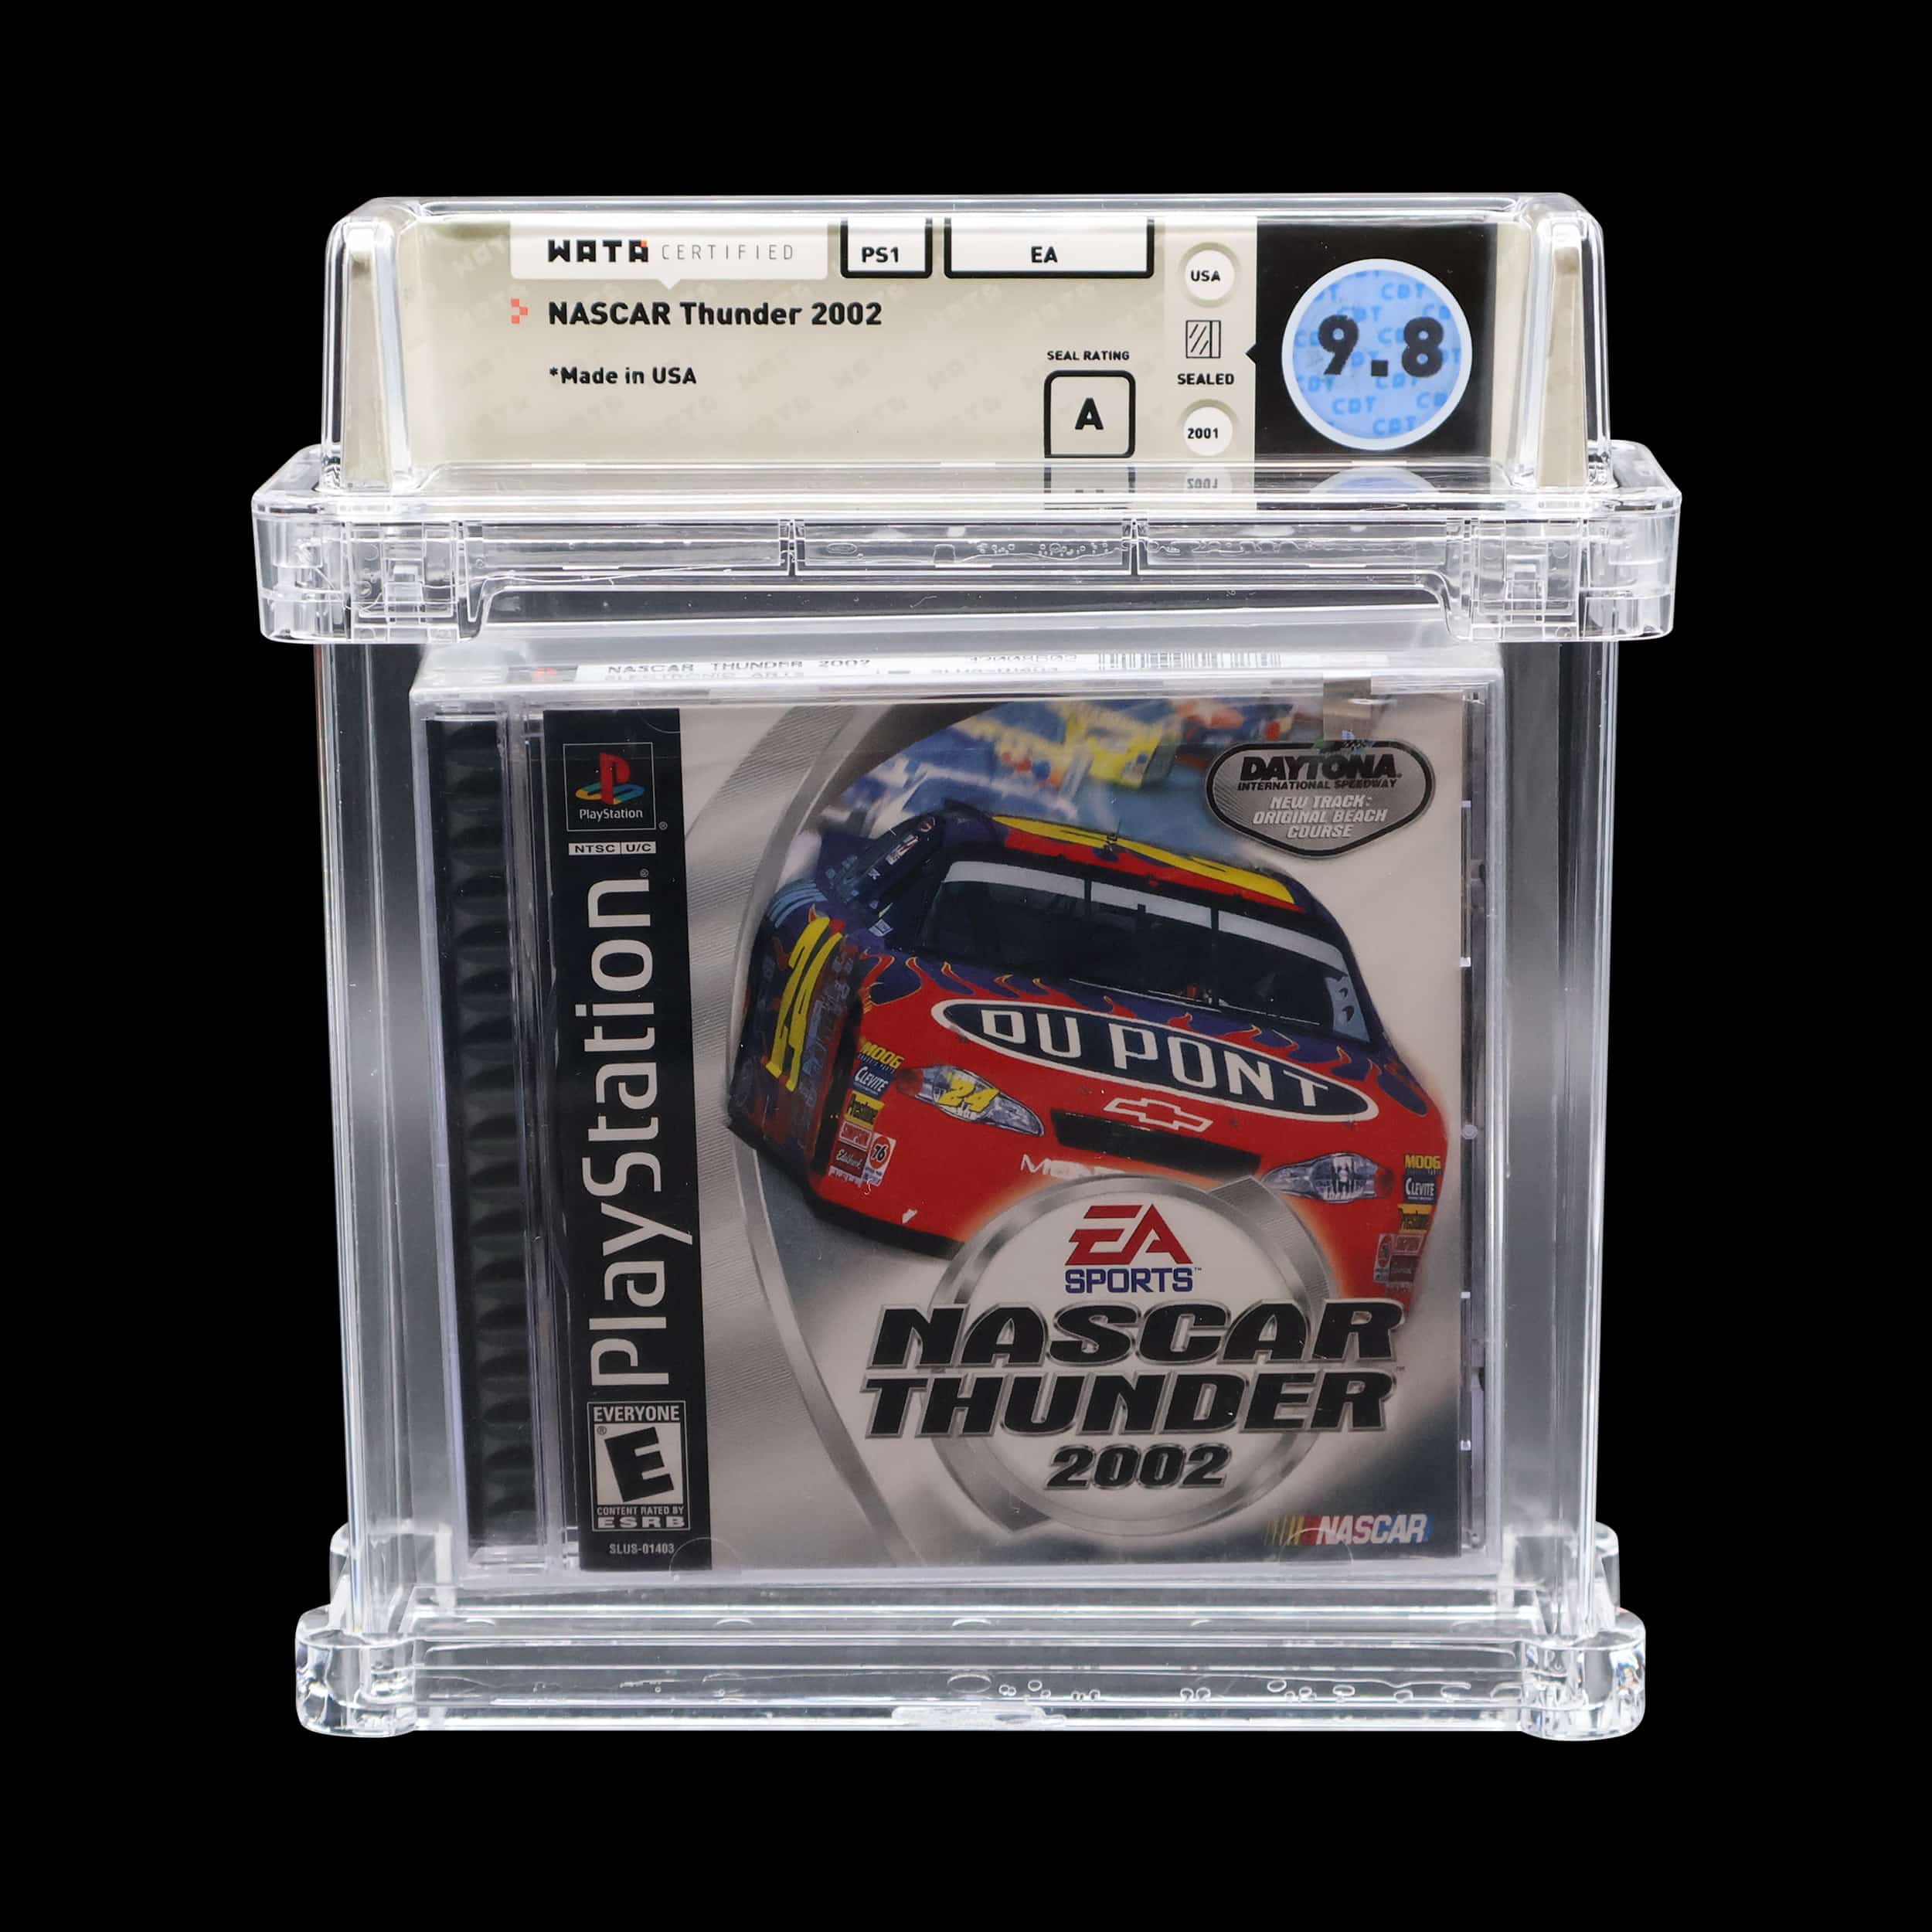 NASCAR Thunder 2002 PS1 game, WATA-graded 9.8, sealed in acrylic display case.